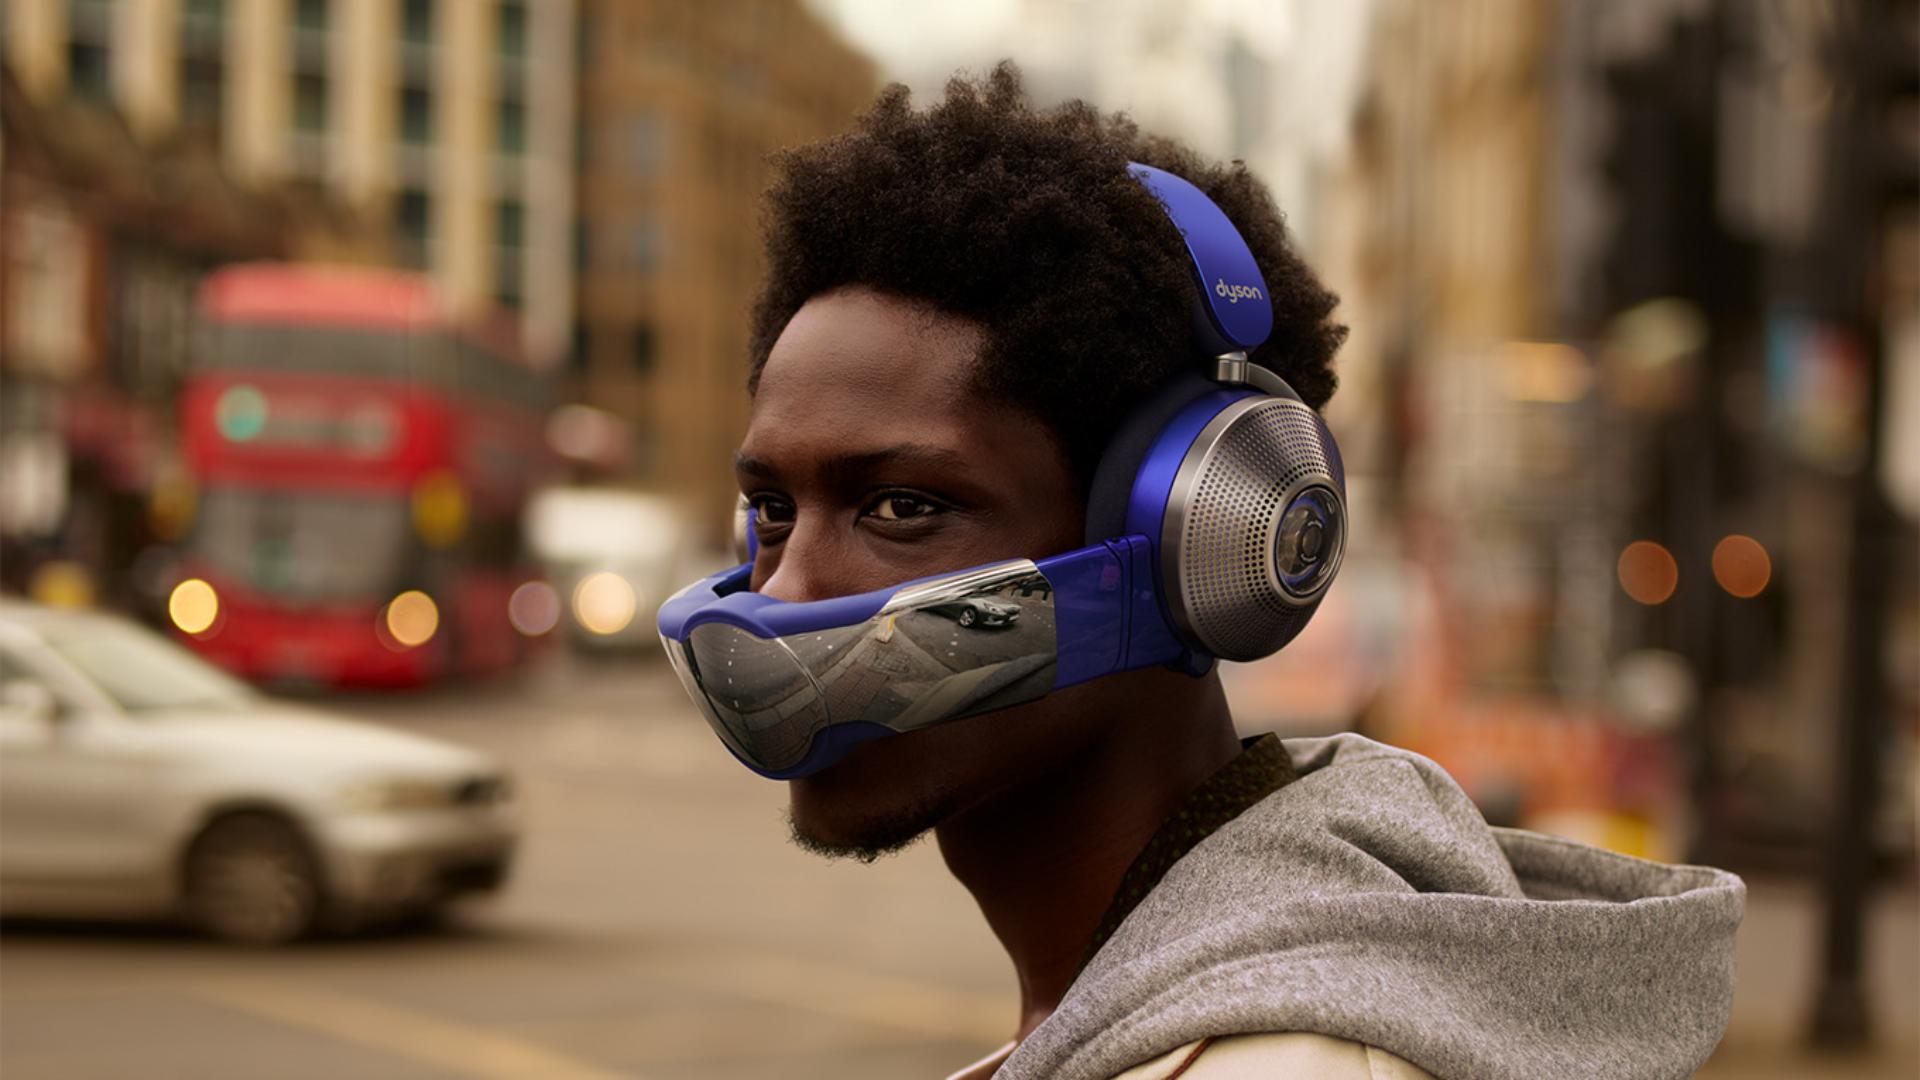 Man wearing Dyson Zone headphones with air purification with visor attached.